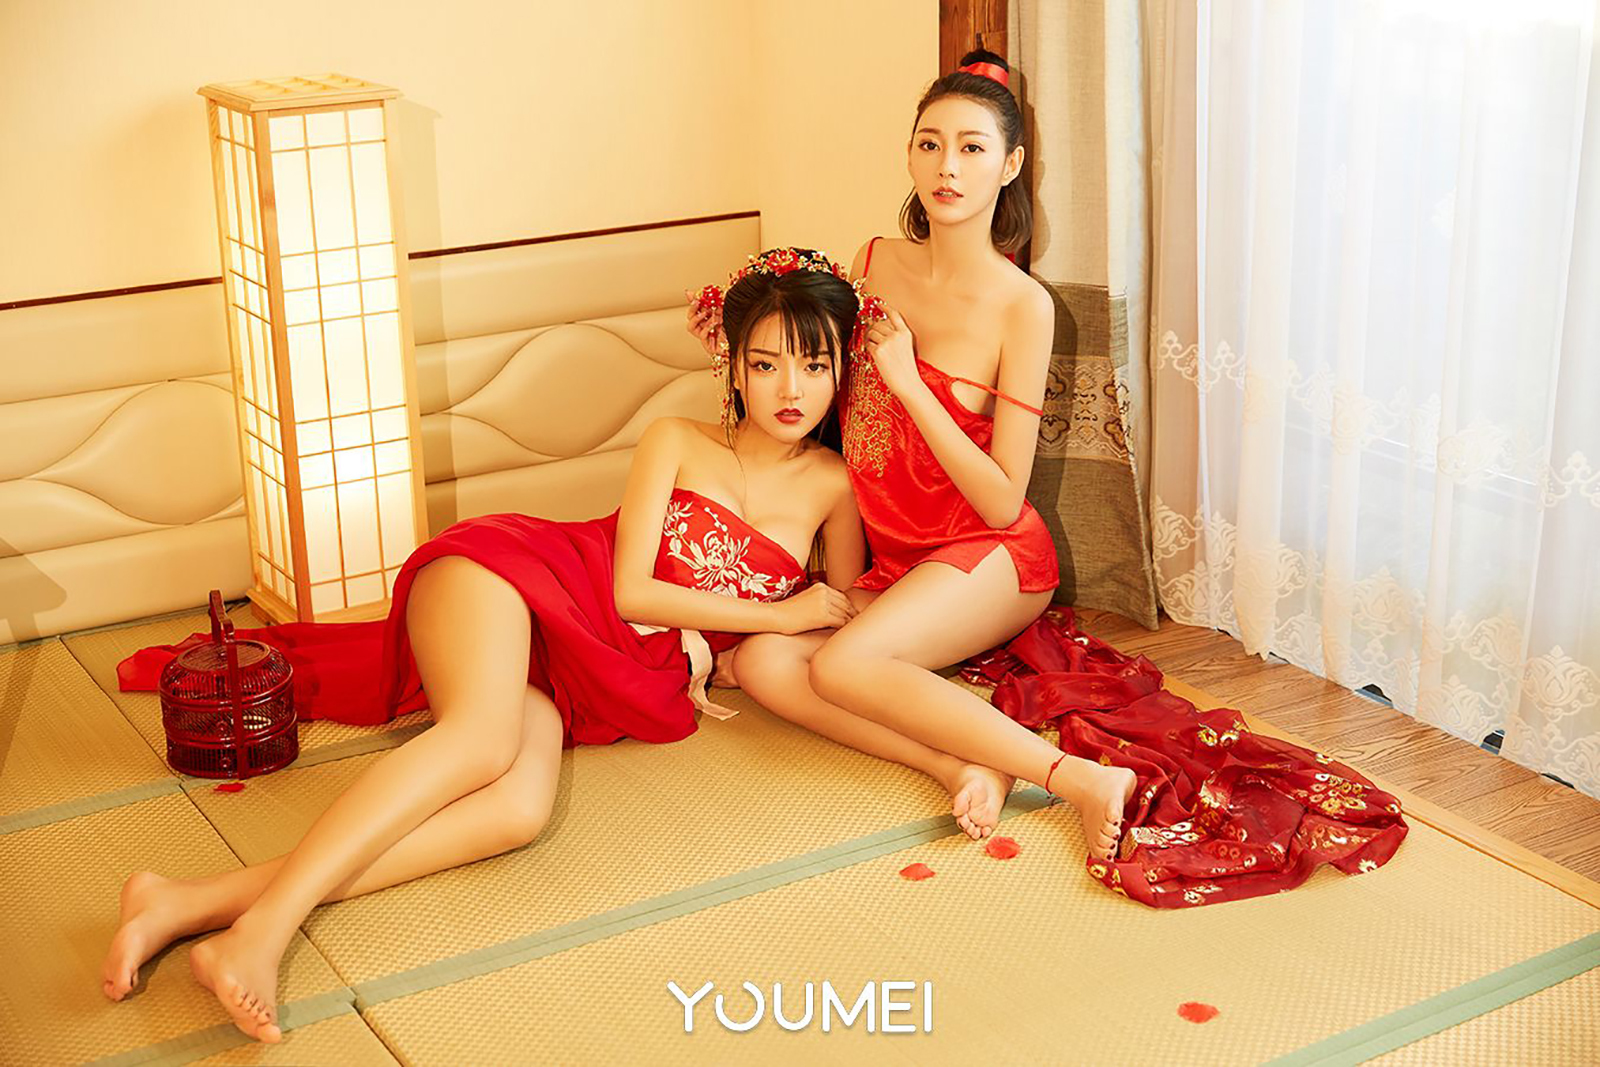 [Youmei Youmei] August 13, 2018 no.046 wedding party